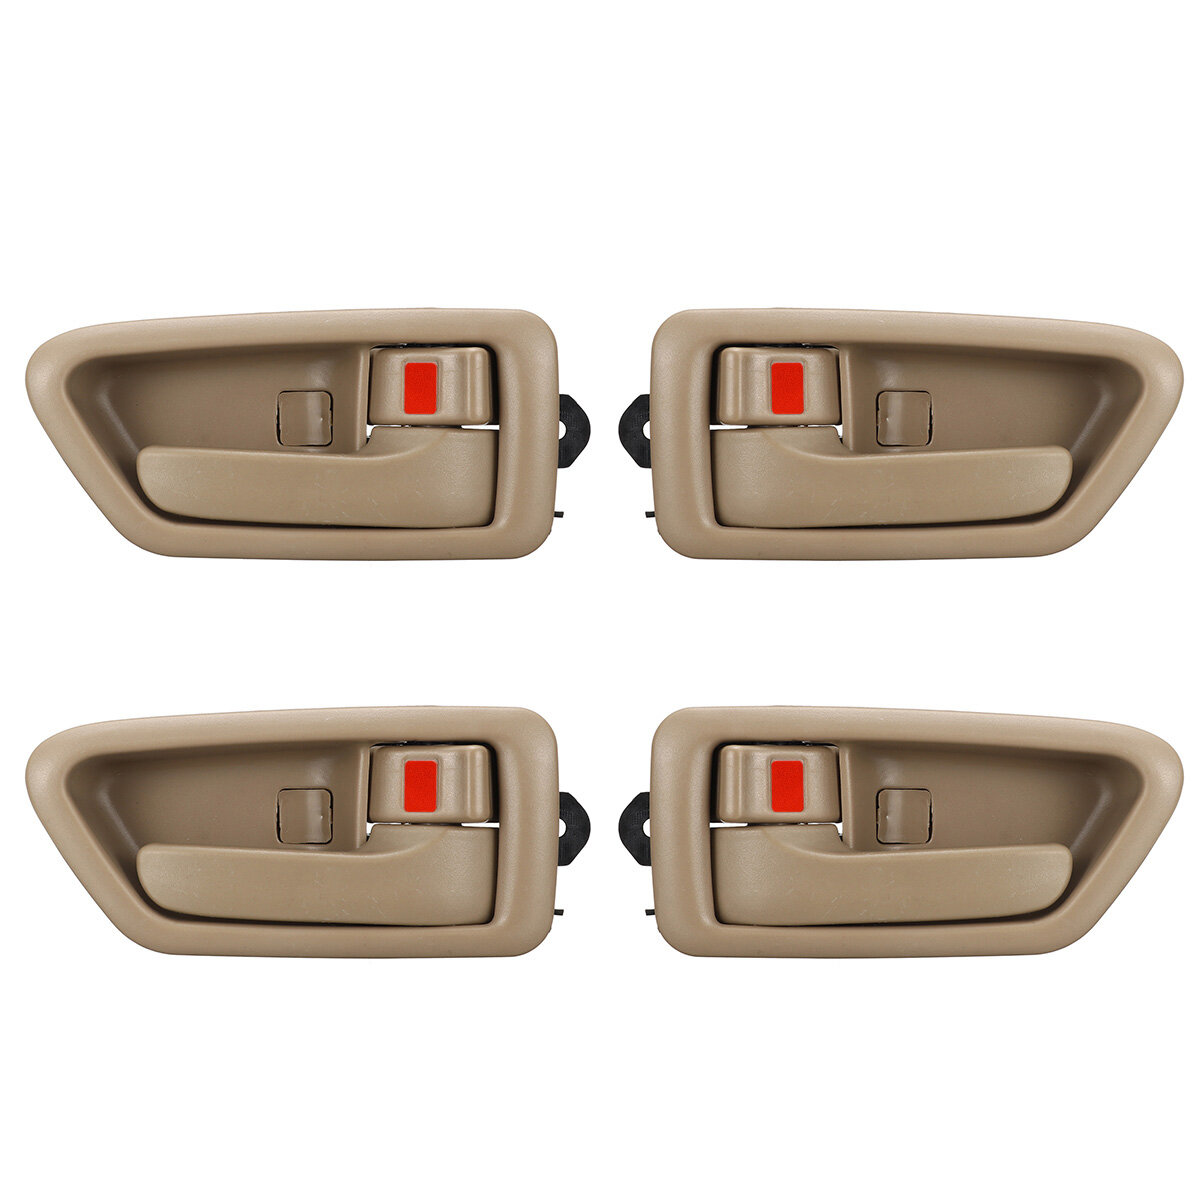 4PCS Car Door Handle for Toyota 1997-2001 Camry Inside Left & Right